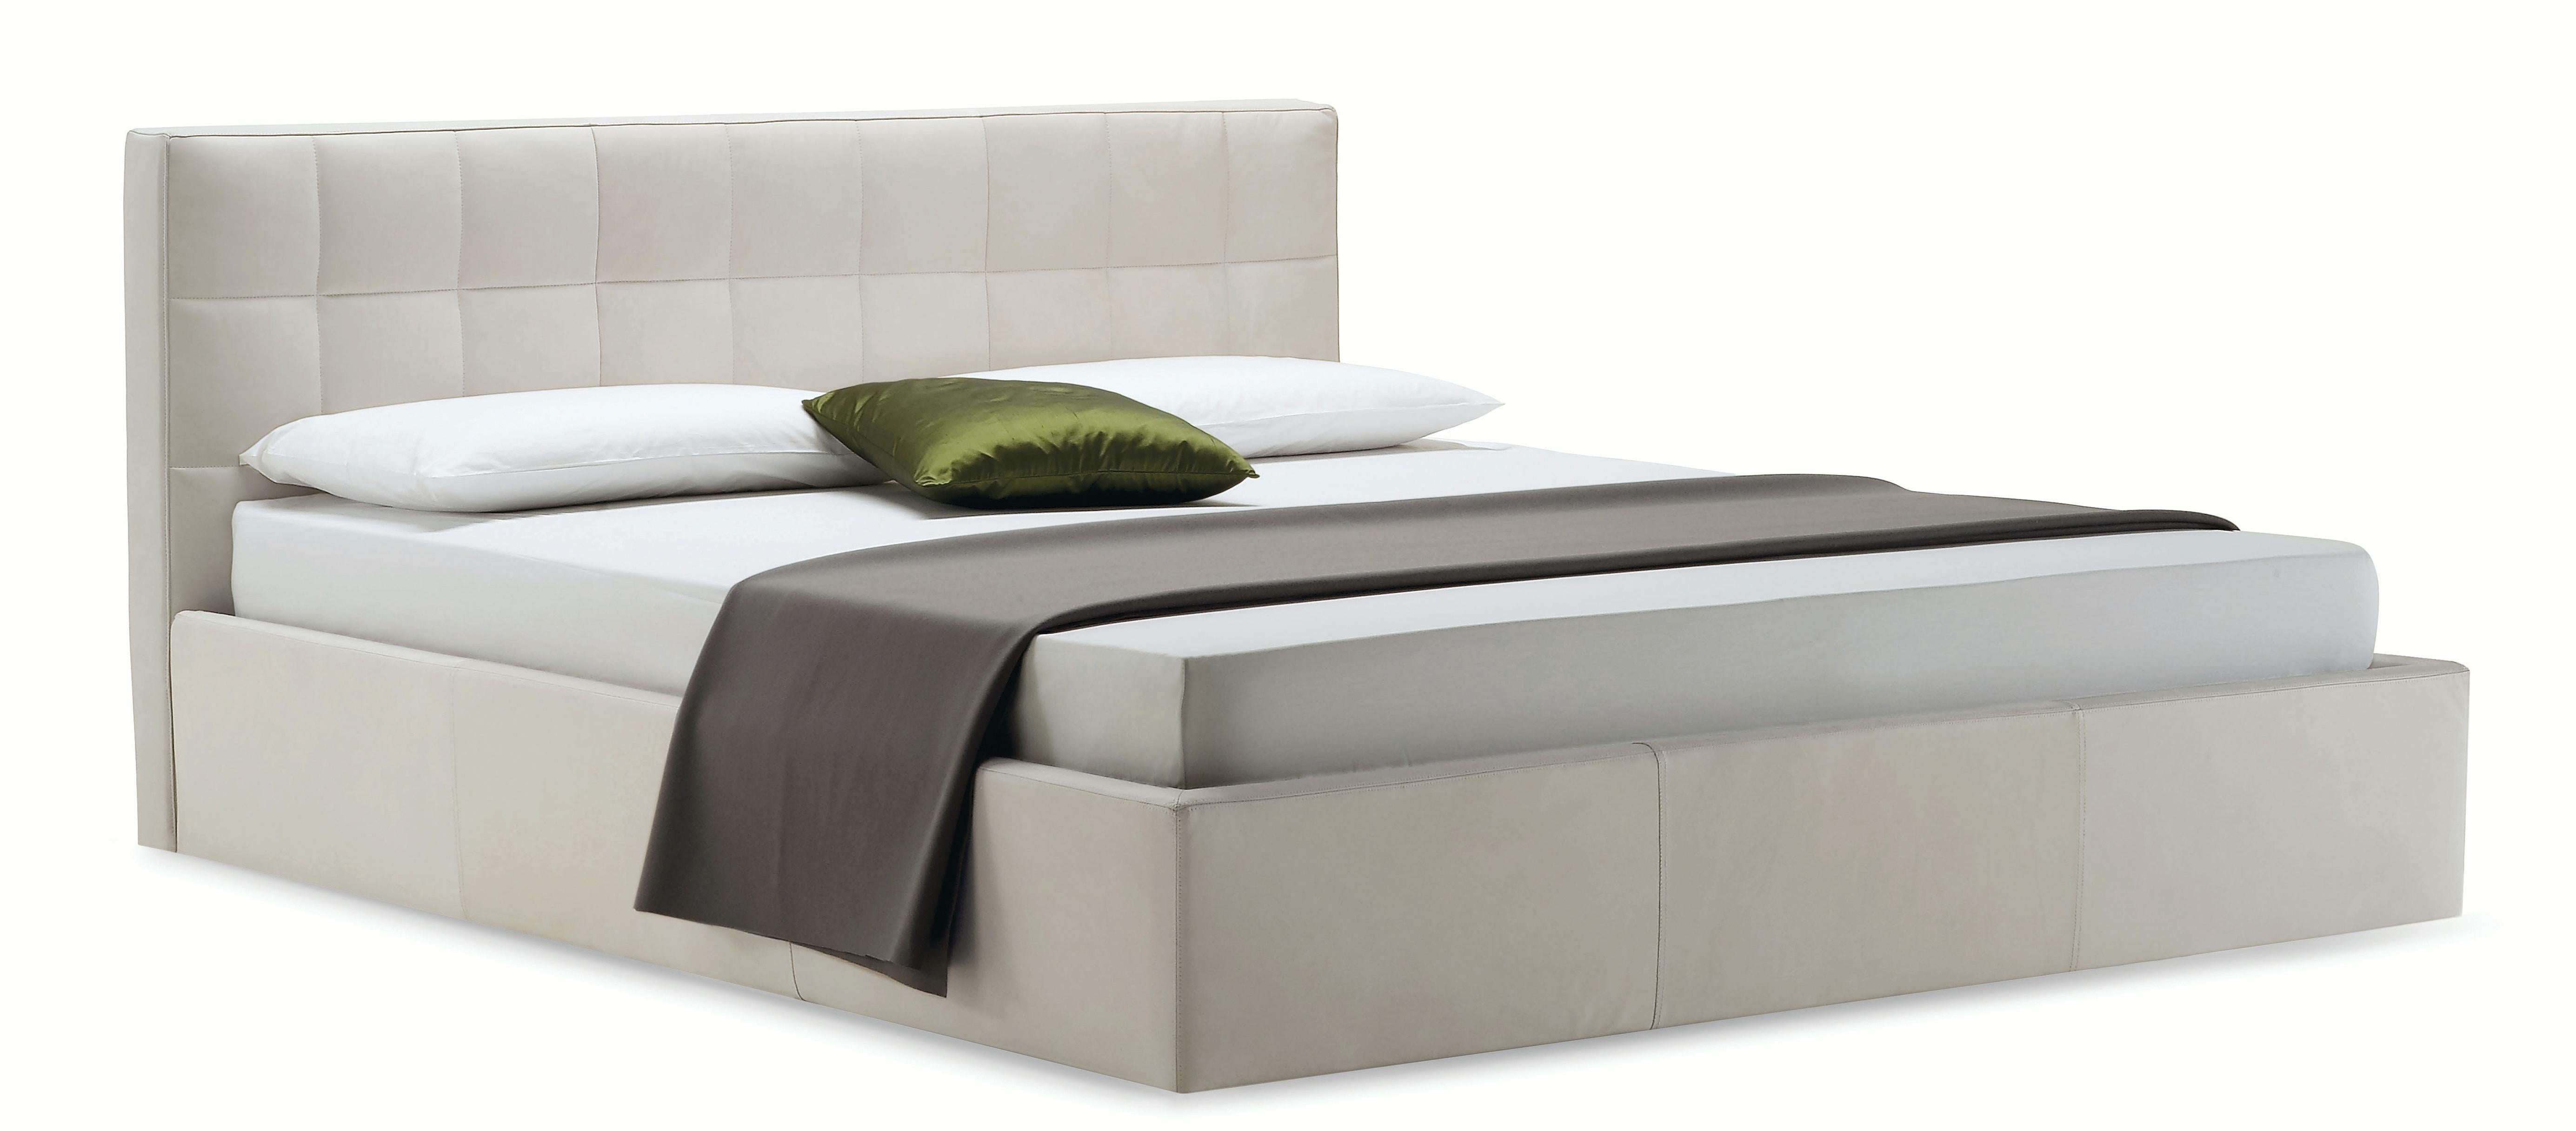 Zanotta Small Box Bed with Container Unit in White Upholstery with Steel Frame by Emaf Progetti

Bed with container unit. Steel frame, varnished aluminium. Suspension in natural bent beech strips, with stiffness adjusters, inserted in nylon